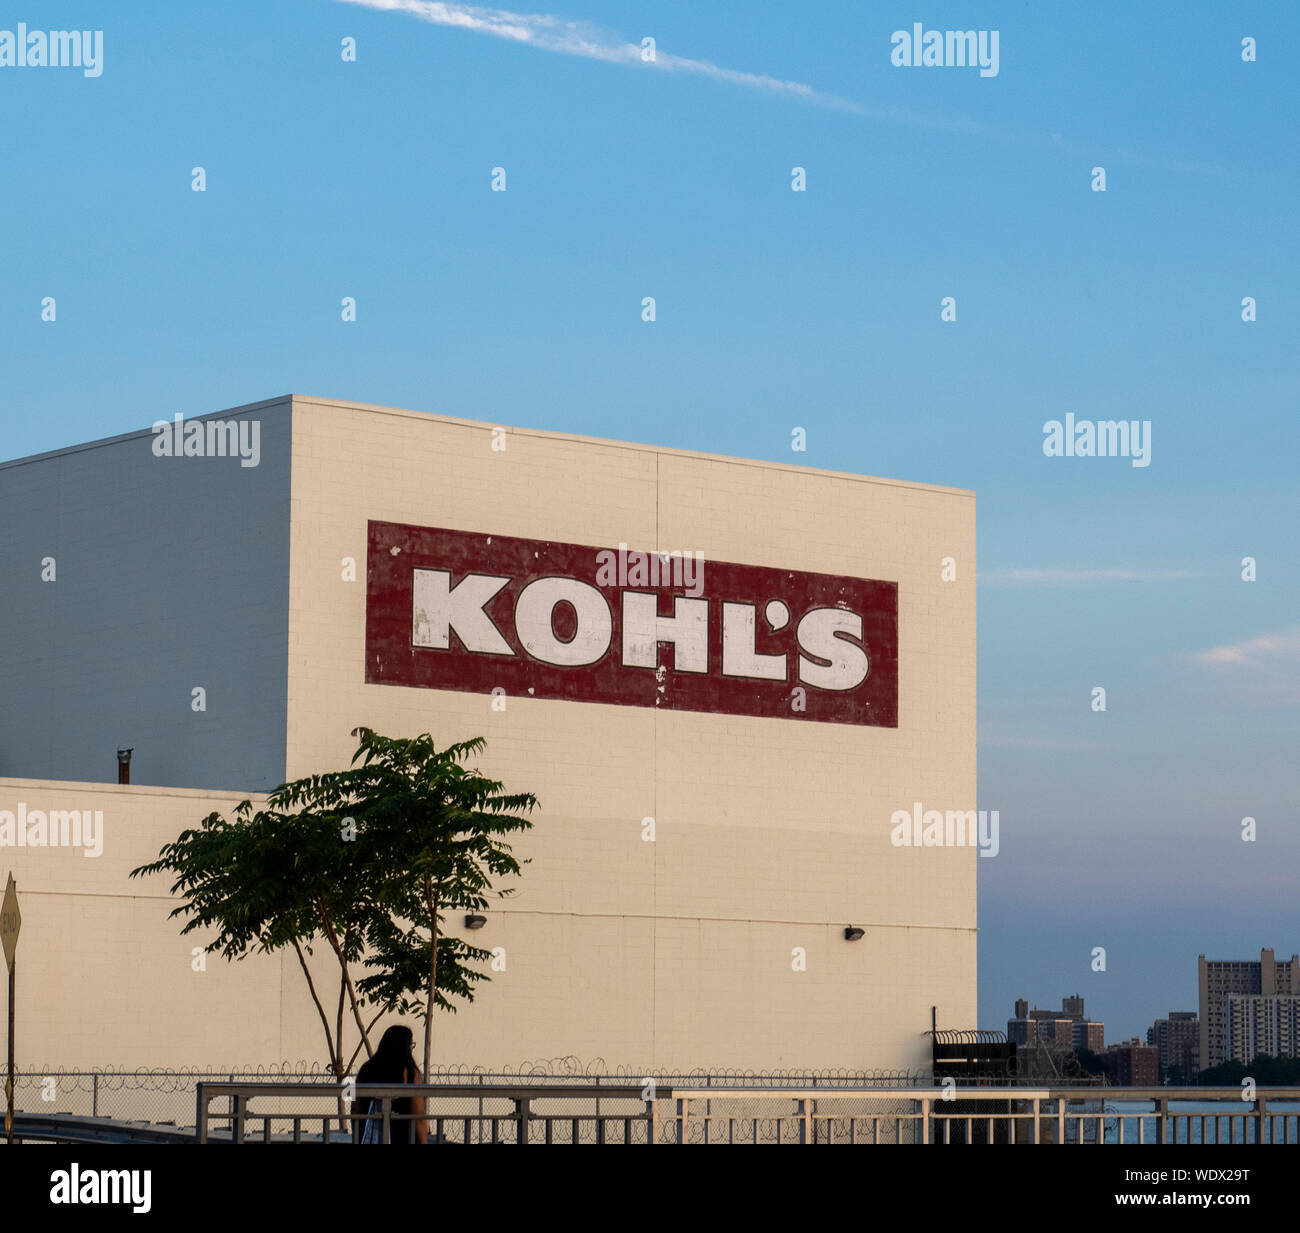 https://c8.alamy.com/comp/WDX29T/brooklyn-ny-august-12-2019-logo-of-kohls-department-store-one-of-the-largest-american-retailing-chain-founded-in-1962-more-then-1100-location-WDX29T.jpg